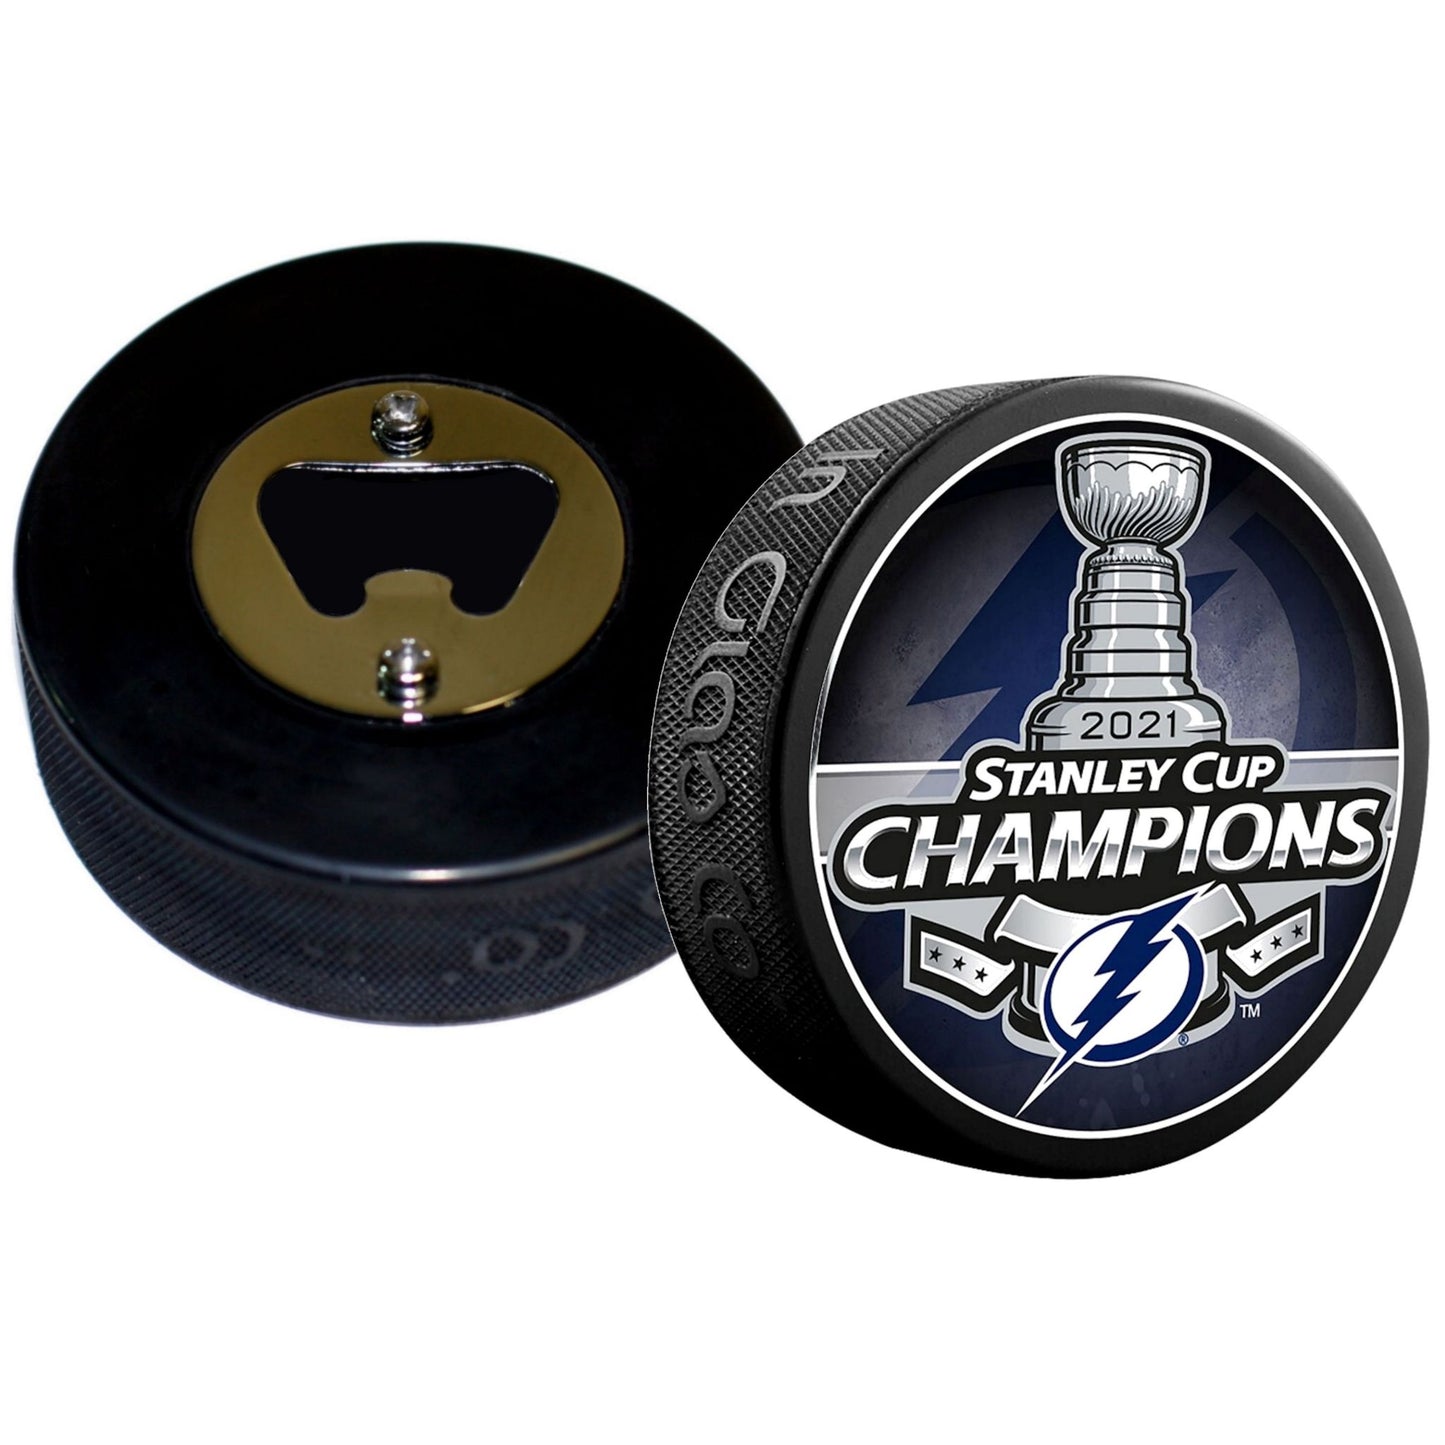 Tampa Bay Lightning 2021 Stanley Cup Champions Hockey Puck Bottle Opener